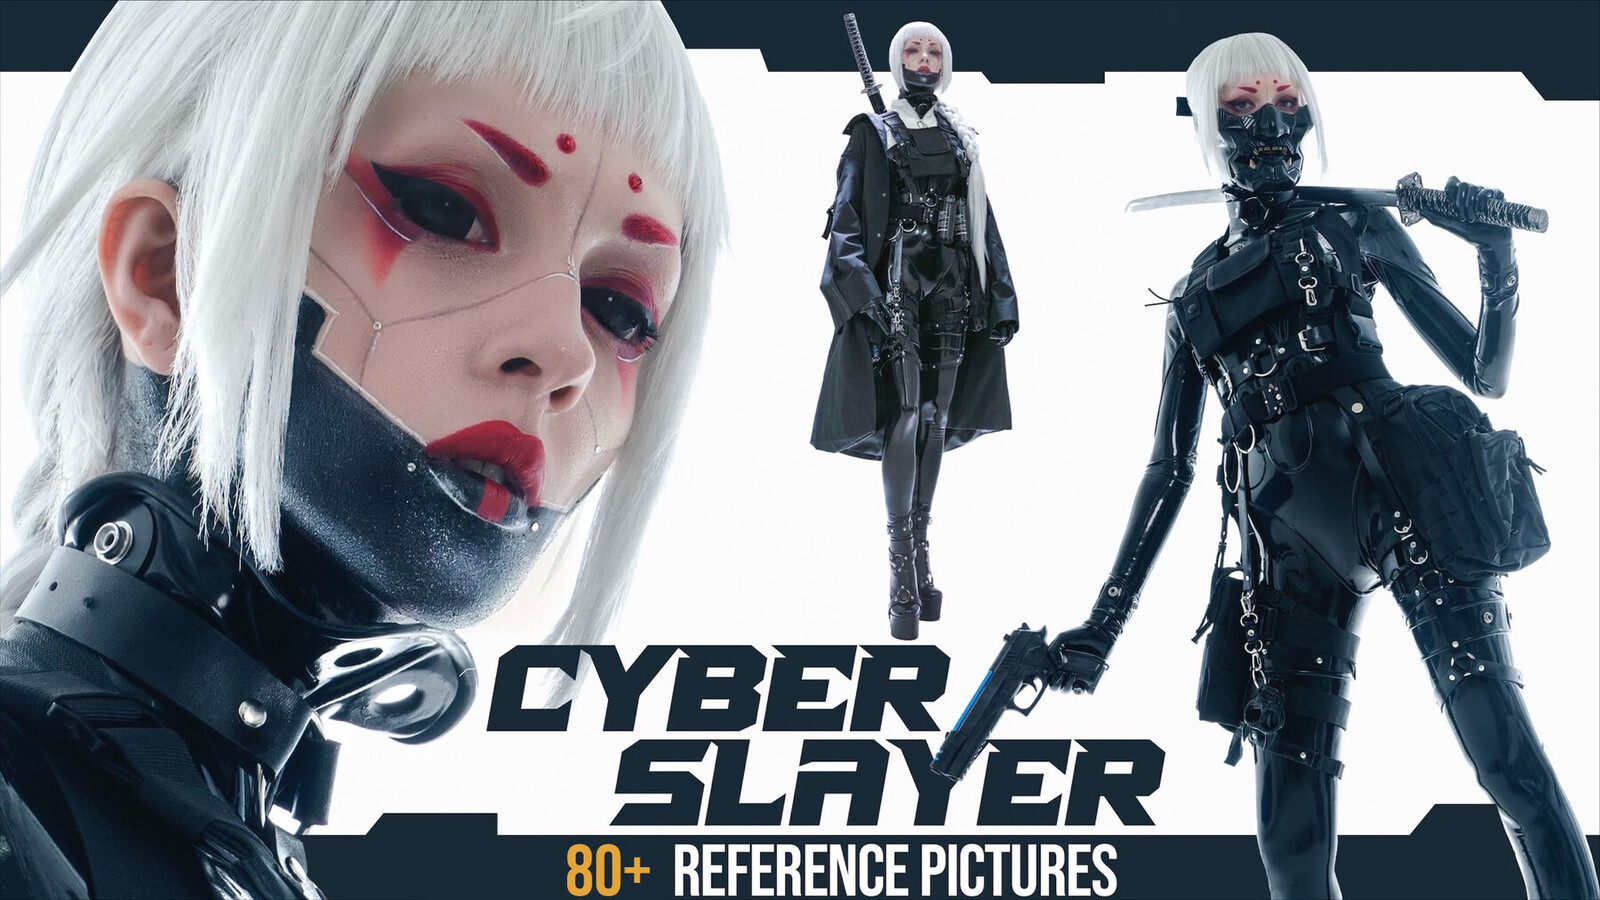 Check out the Cyber Slayer Reference Pack! https://www.artstation.com/a/31514380